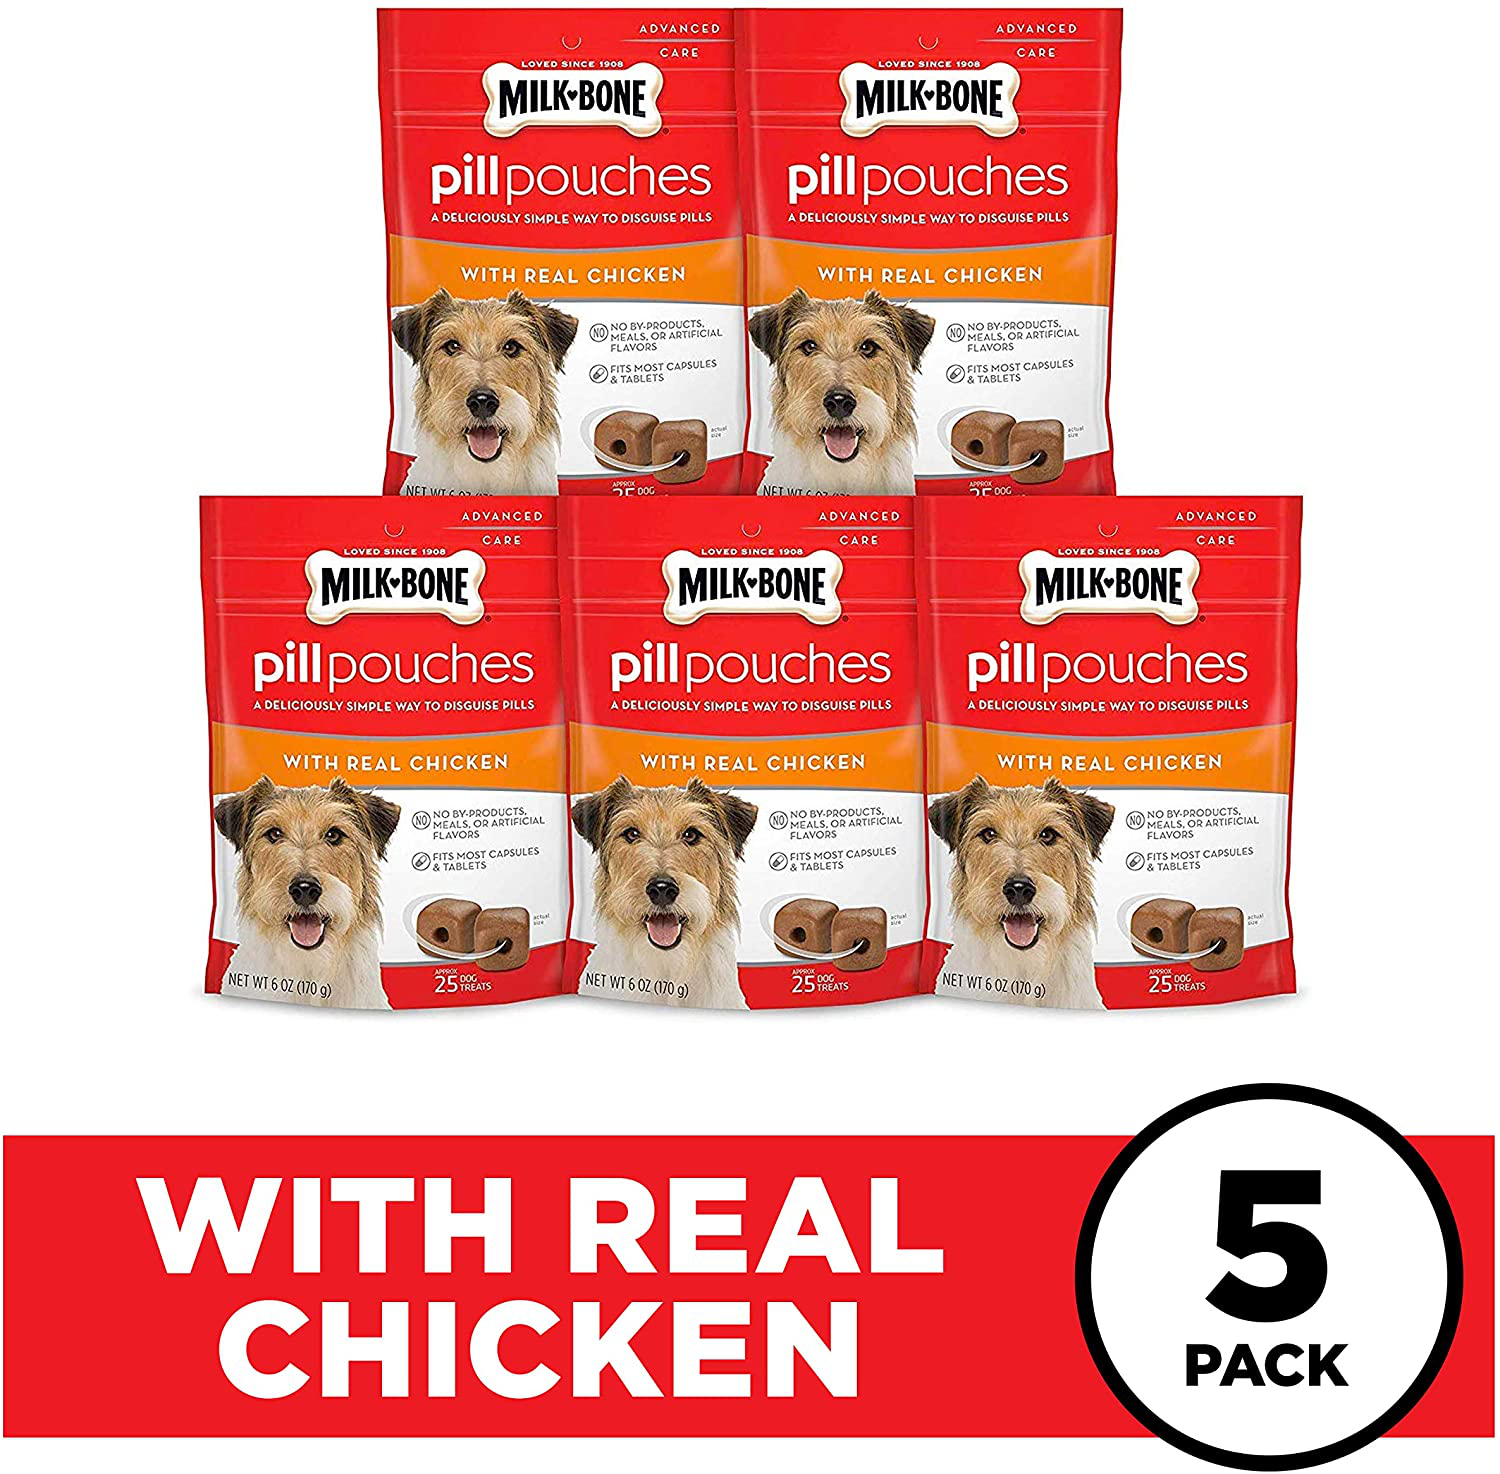 Milk-Bone Pill Pouches Dog Treats to Conceal Medication, 6 Ounce (Pack of 5) Approx. 125 Count Animals & Pet Supplies > Pet Supplies > Dog Supplies > Dog Treats Milk-Bone   